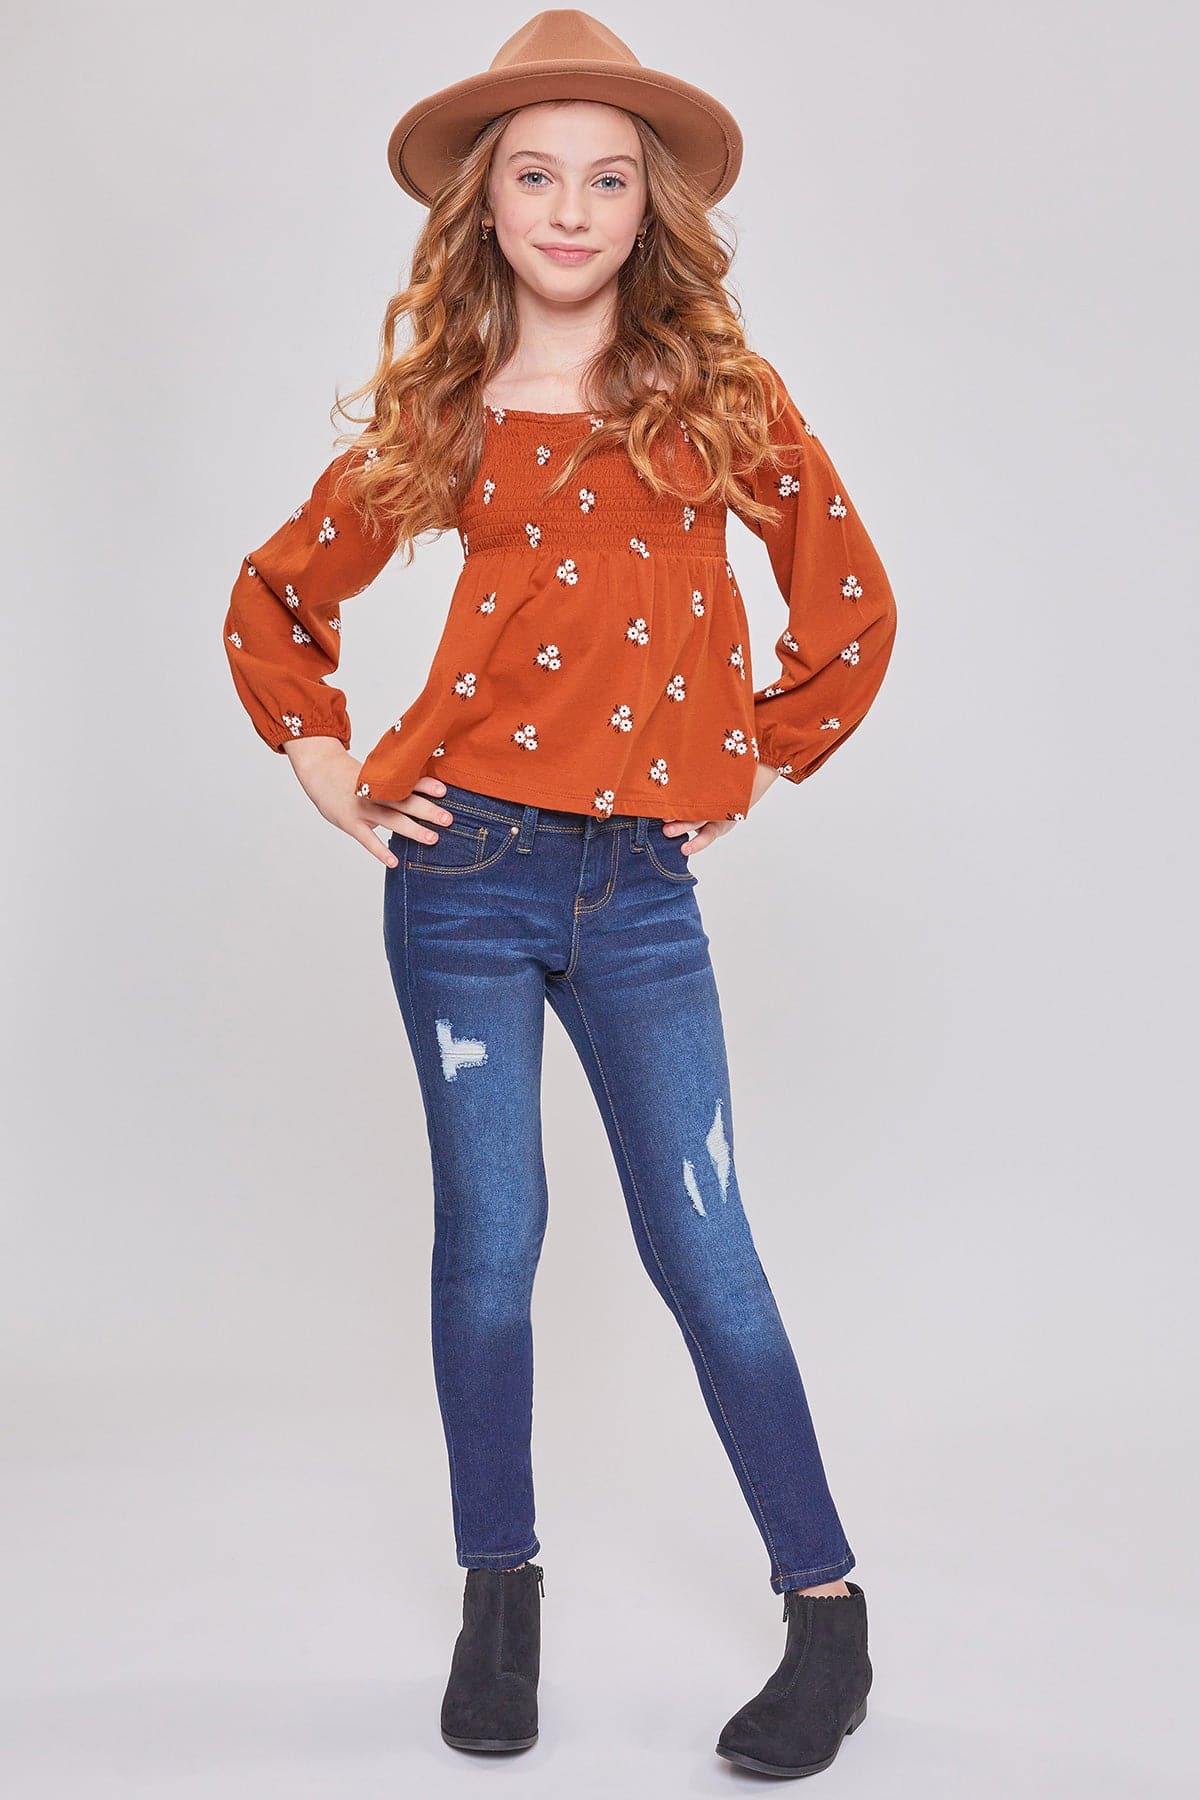 Girls Essential Skinny Jeans With Faux Front Pockets